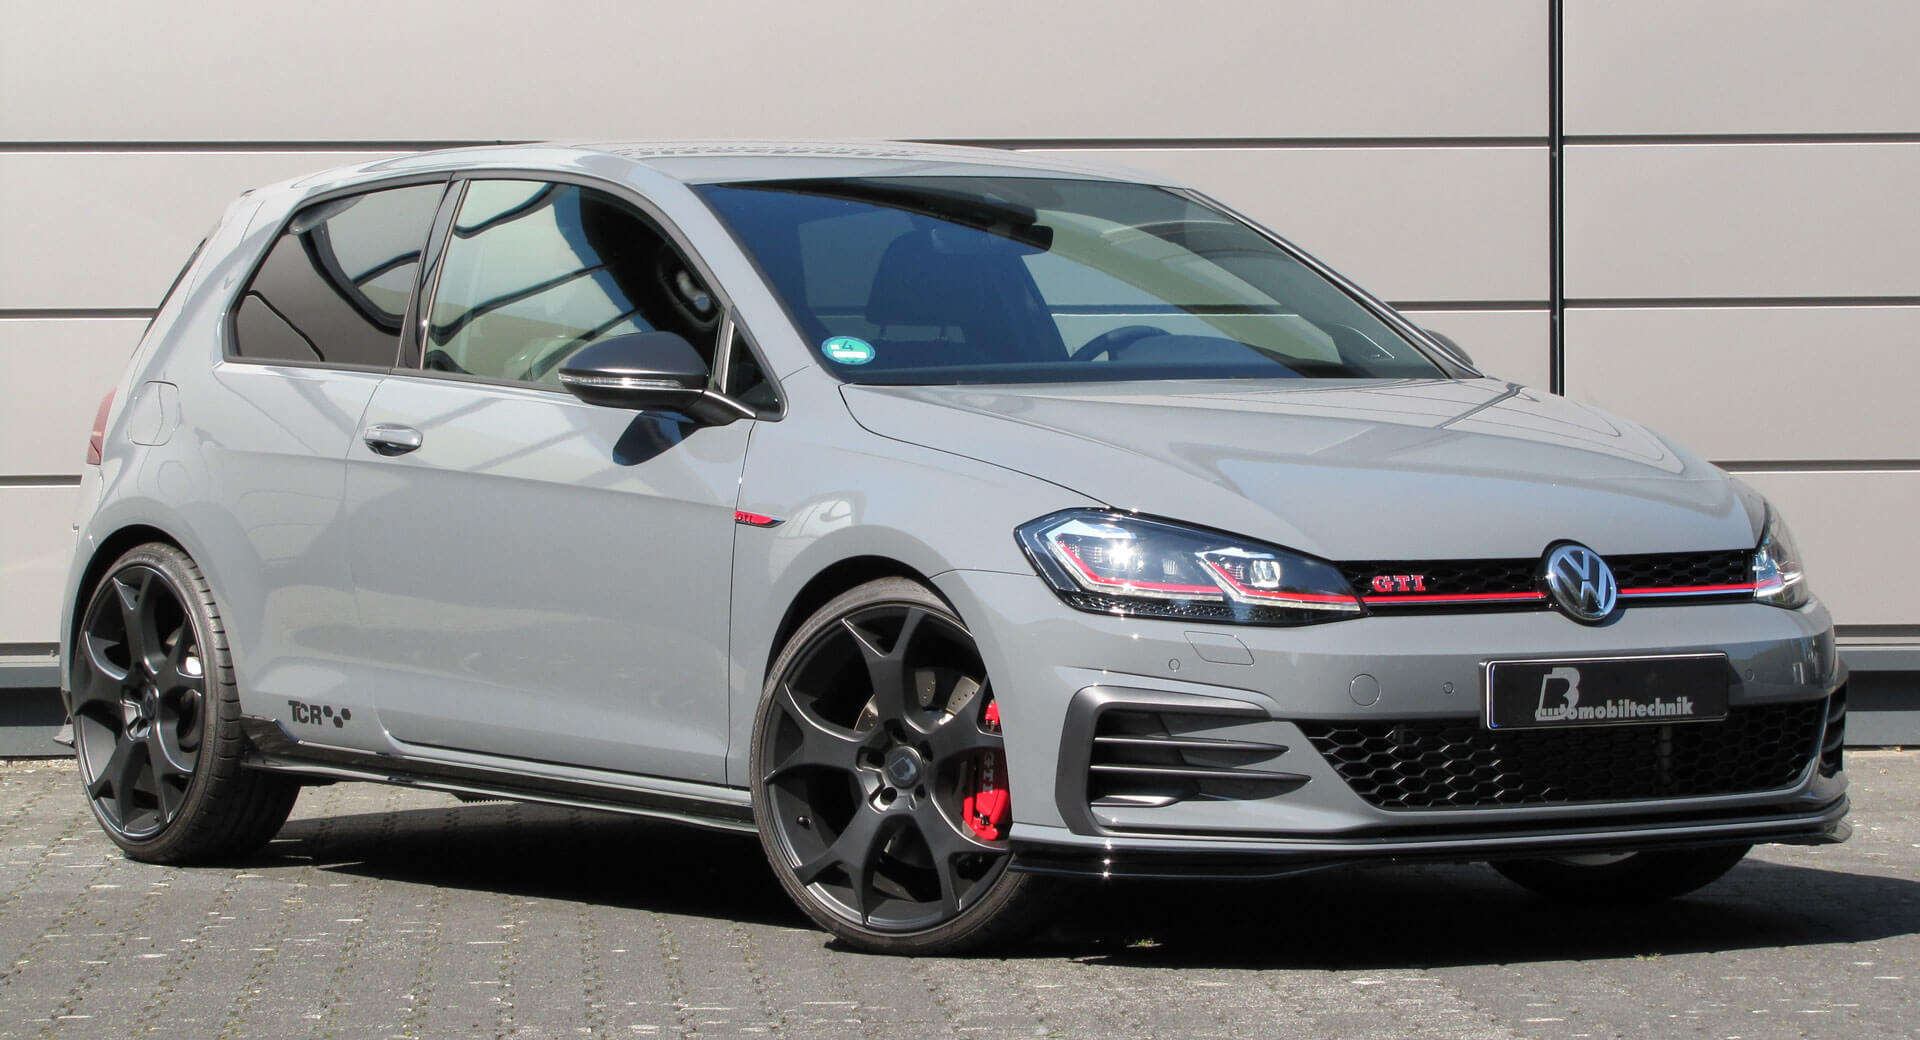 450ps Vw Golf Gti Tcr Is One Brave Fwd Mega Hatch Carscoops